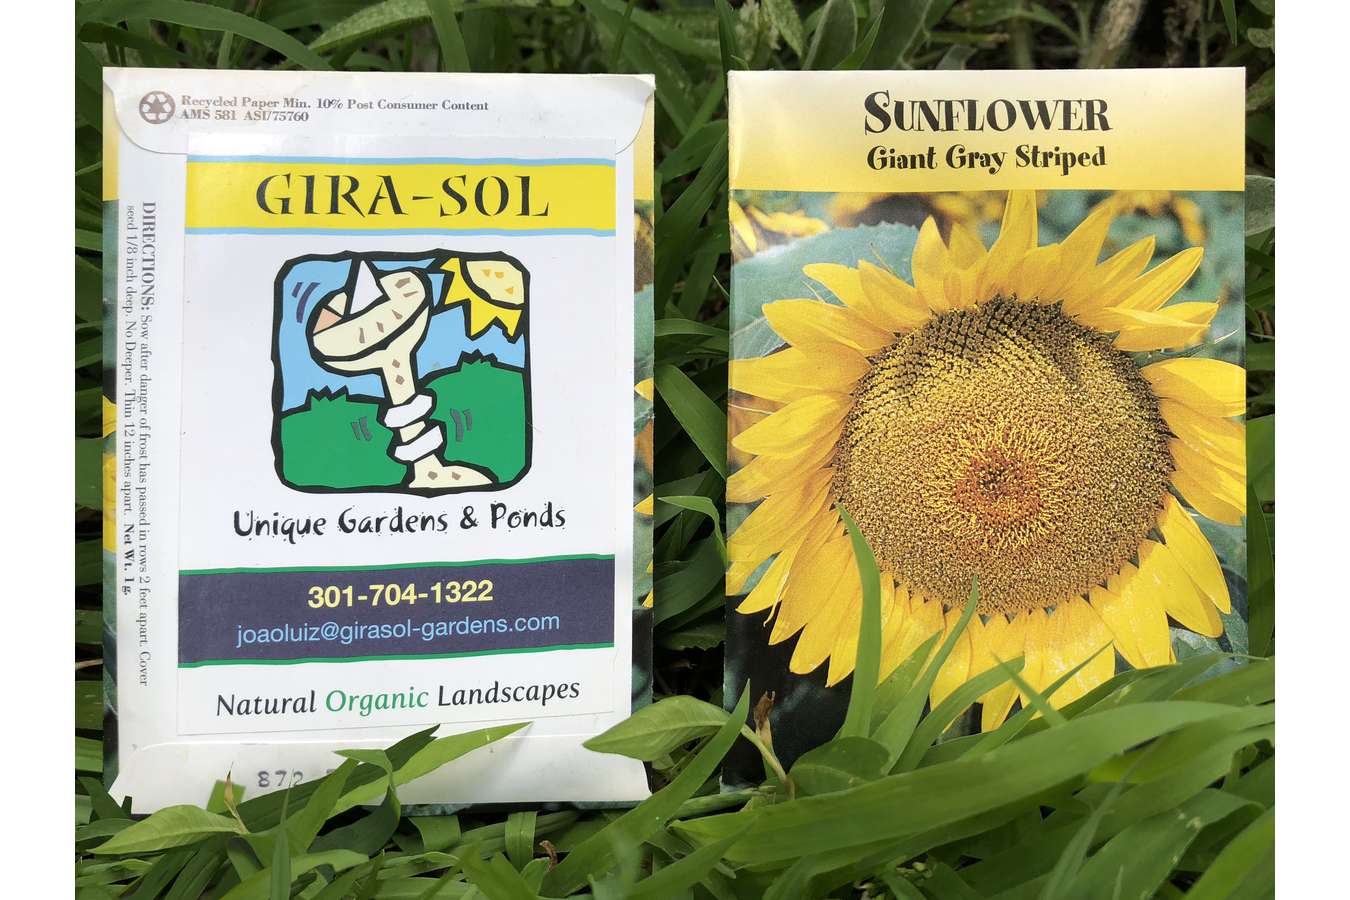 Girasol Packets : Sunflower seeds branded for Girasol are giveaways at festival